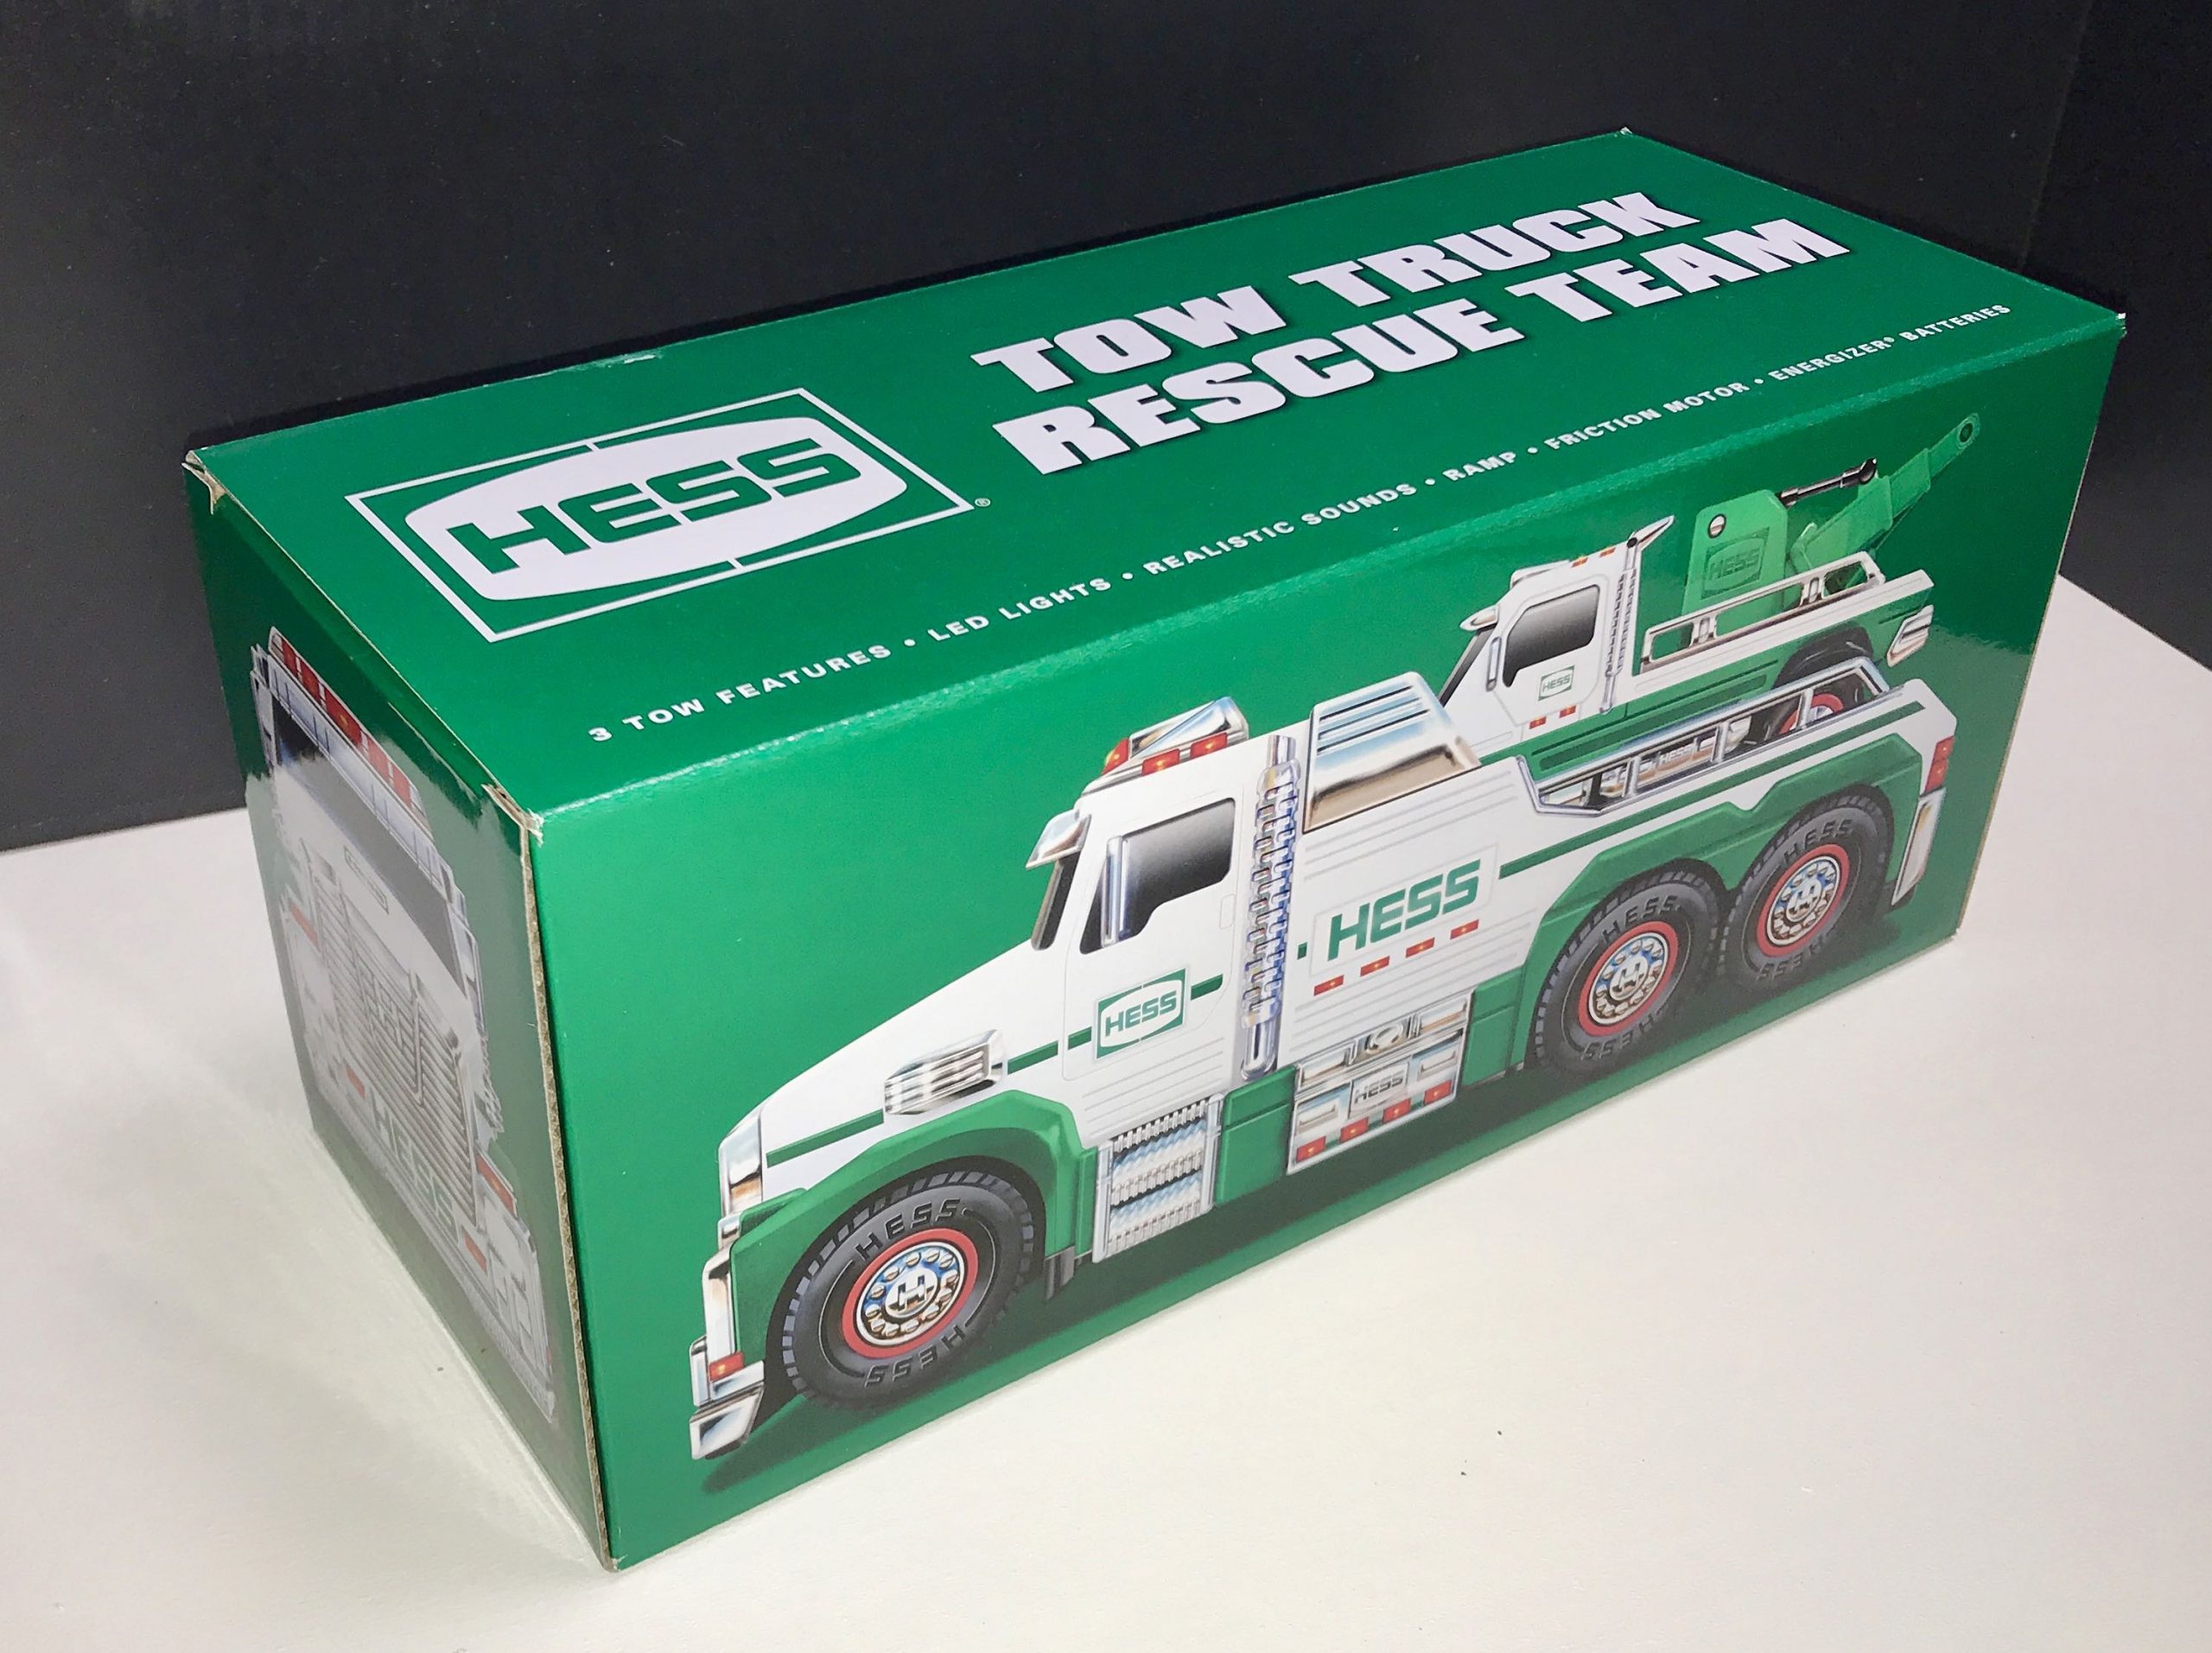 2019 holiday hess truck